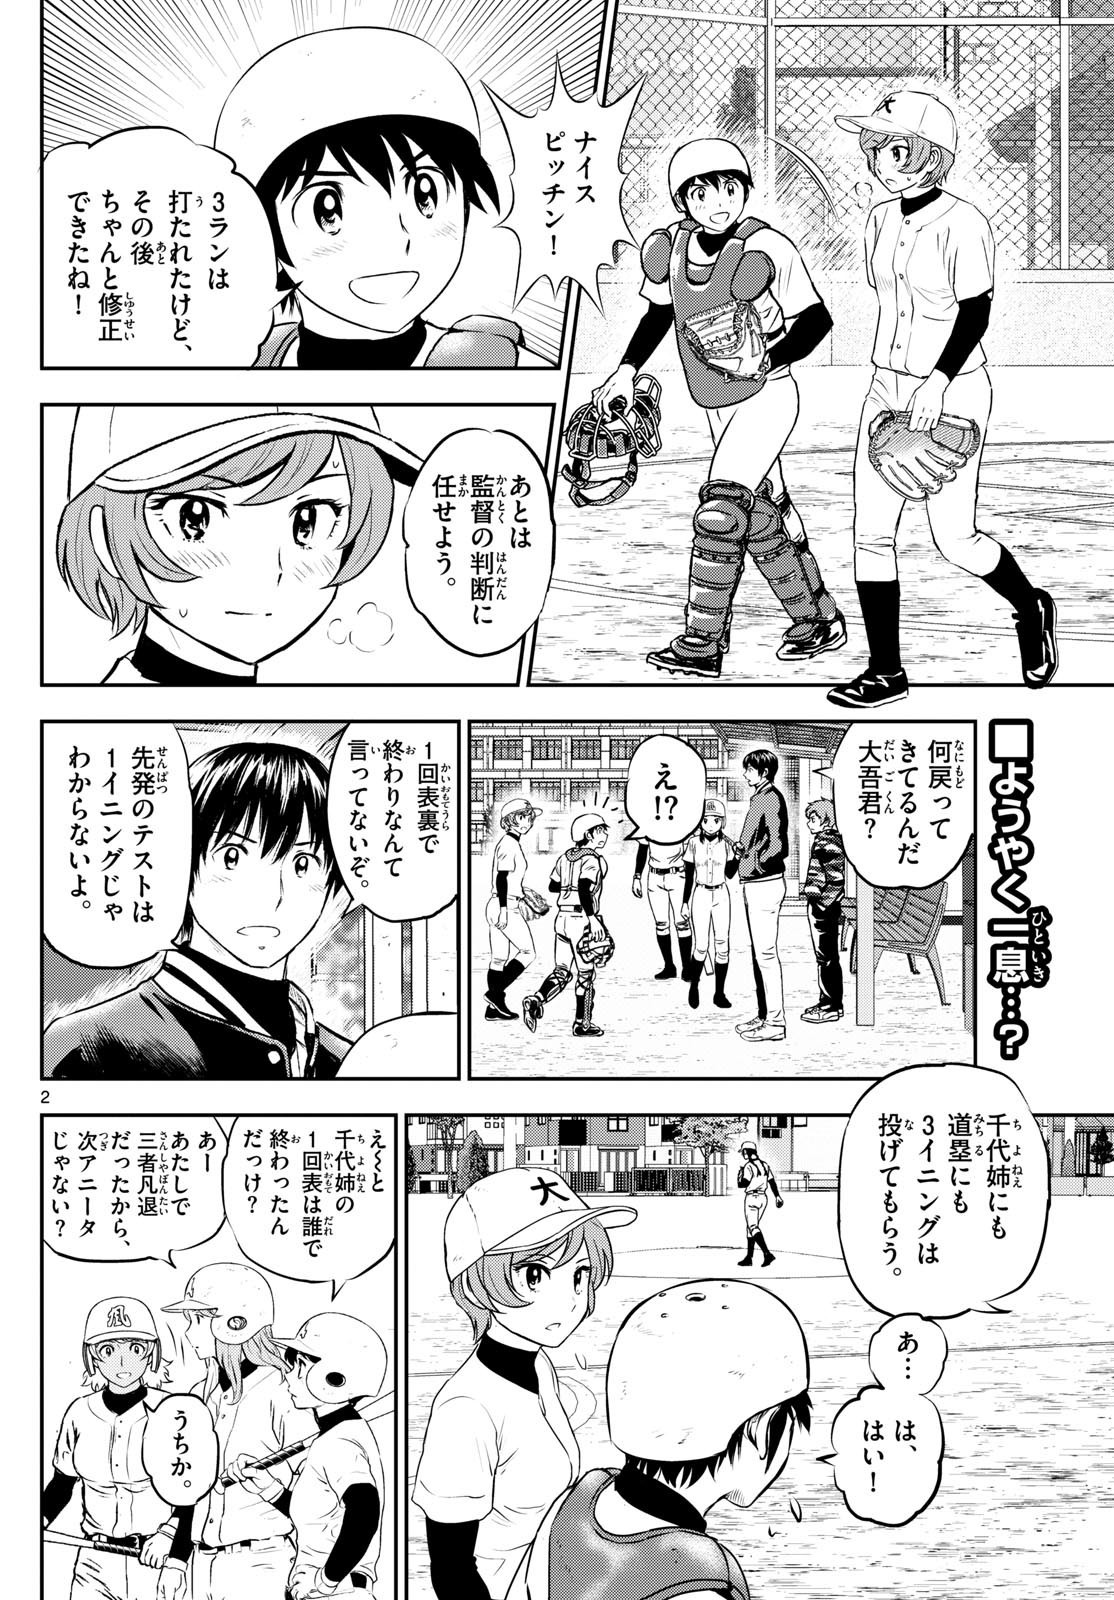 Major 2nd - メジャーセカンド - Chapter 282 - Page 2